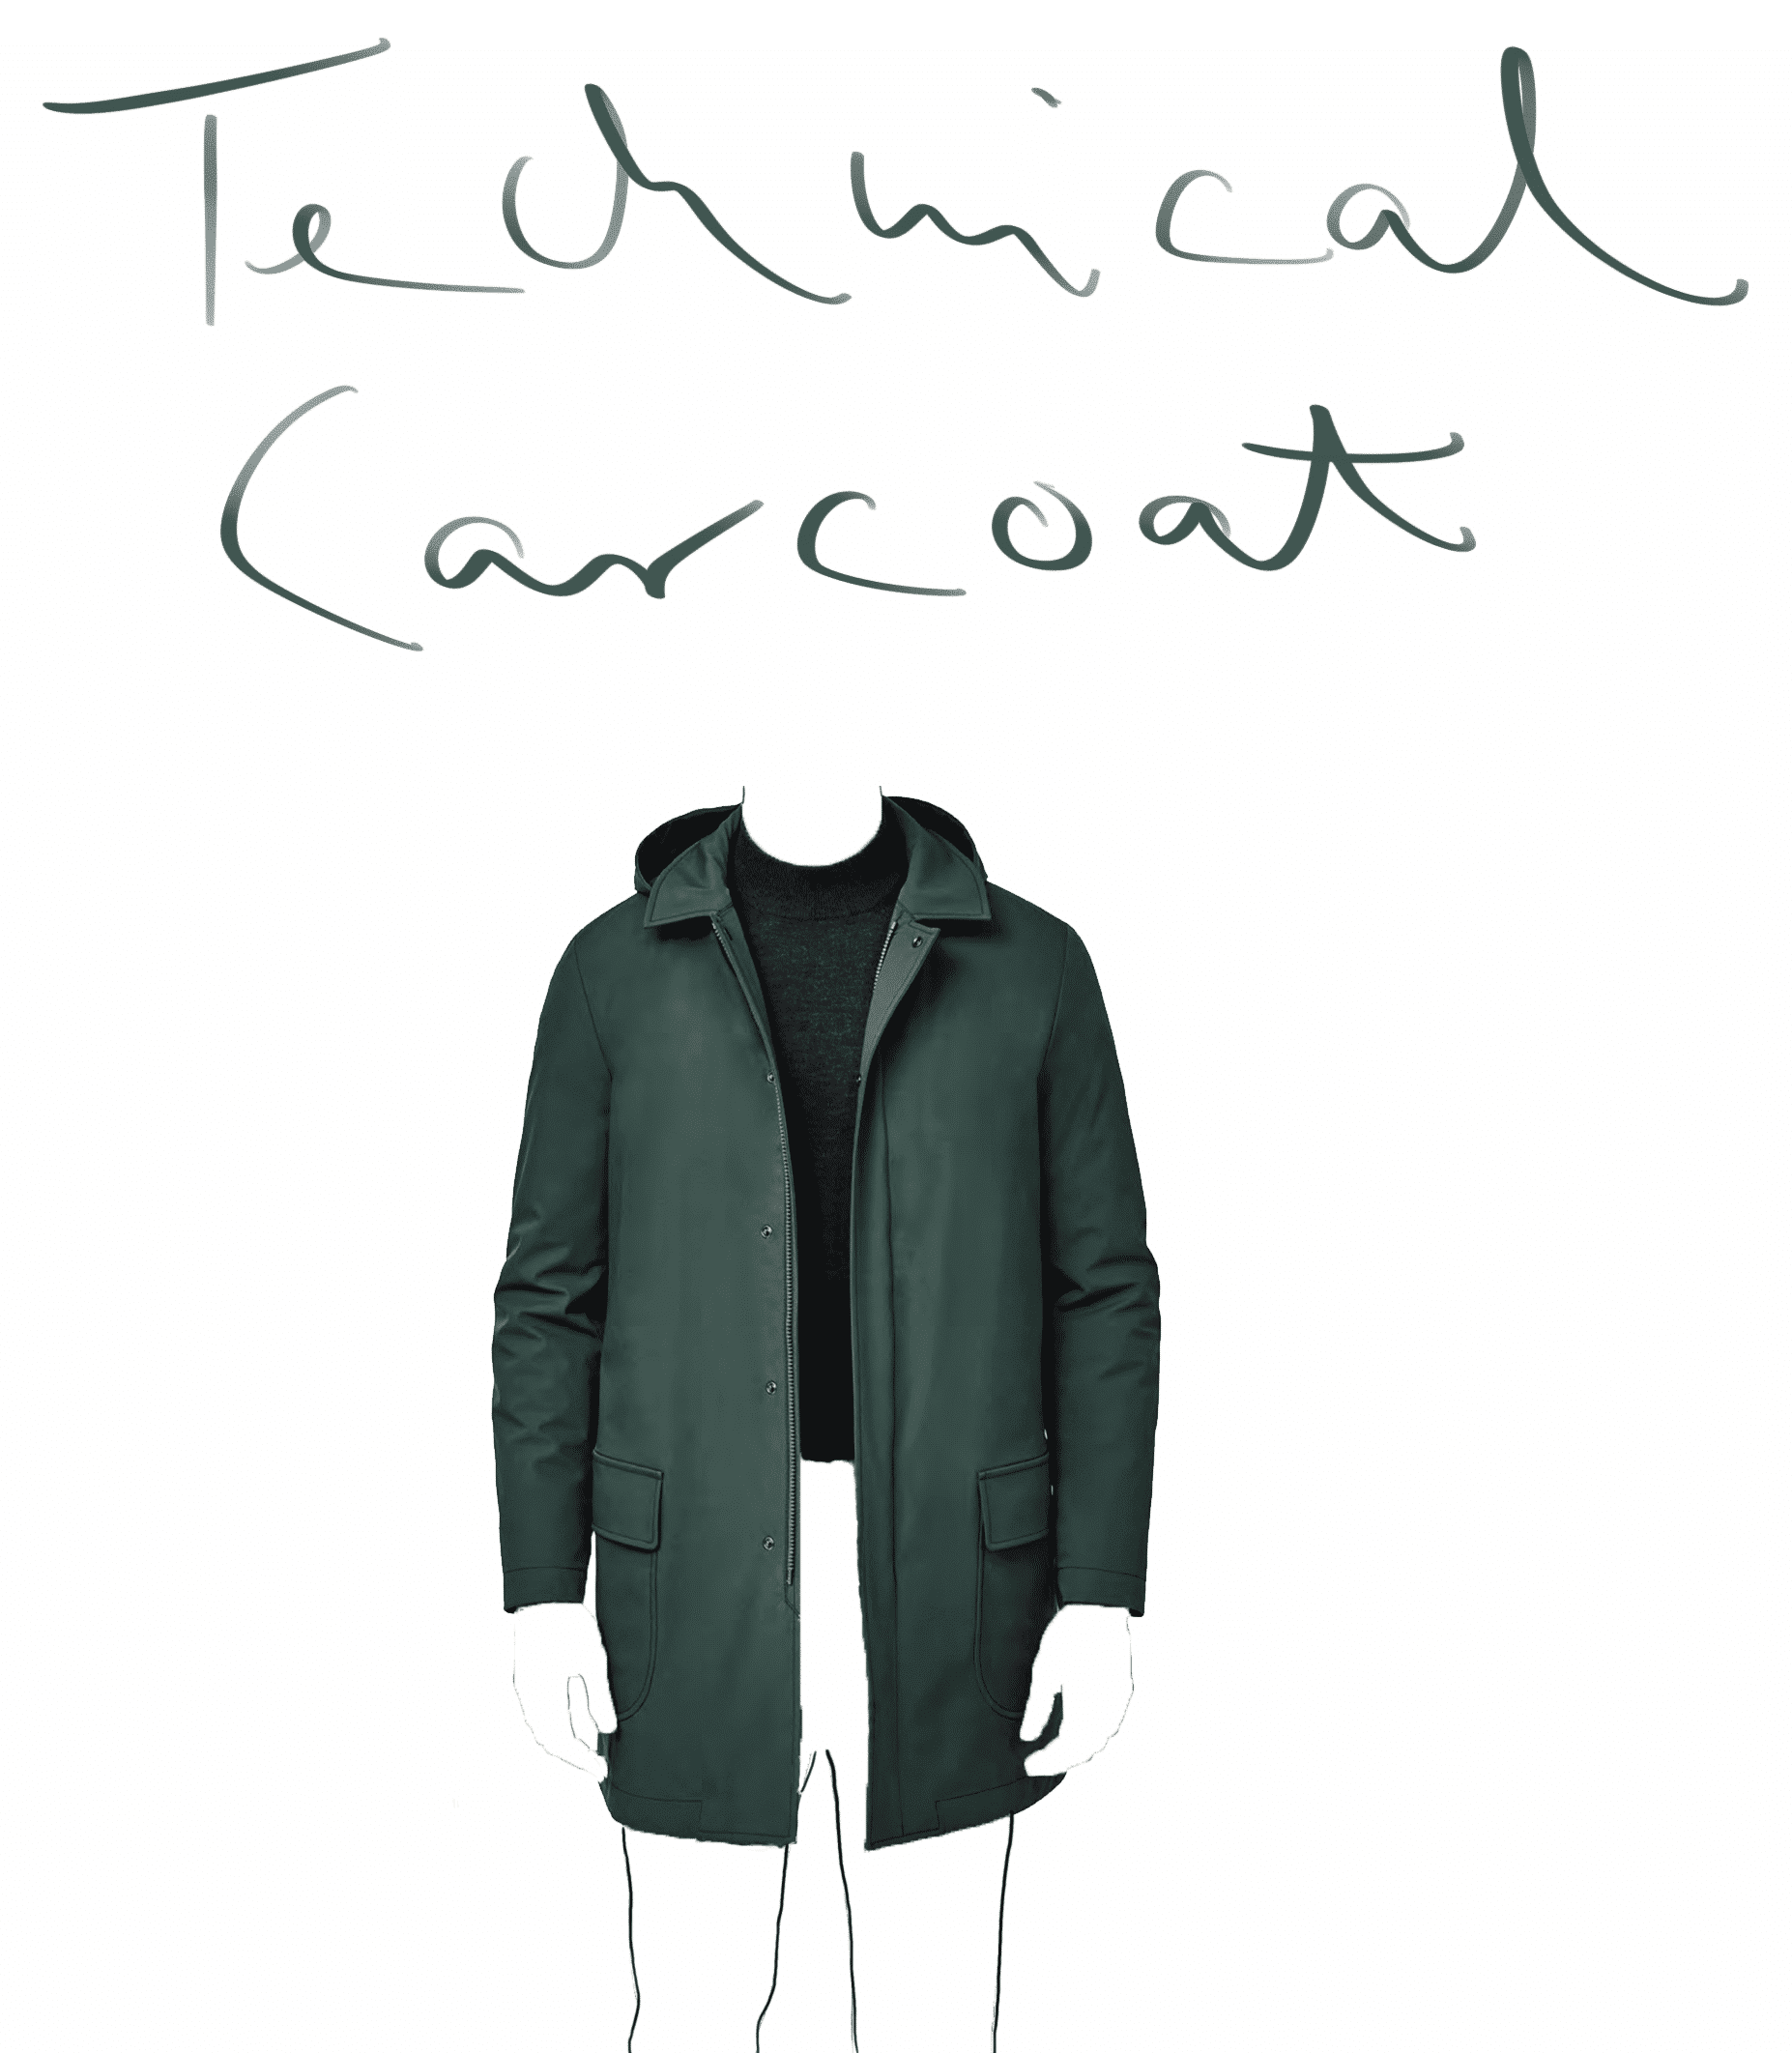 technical carcoat